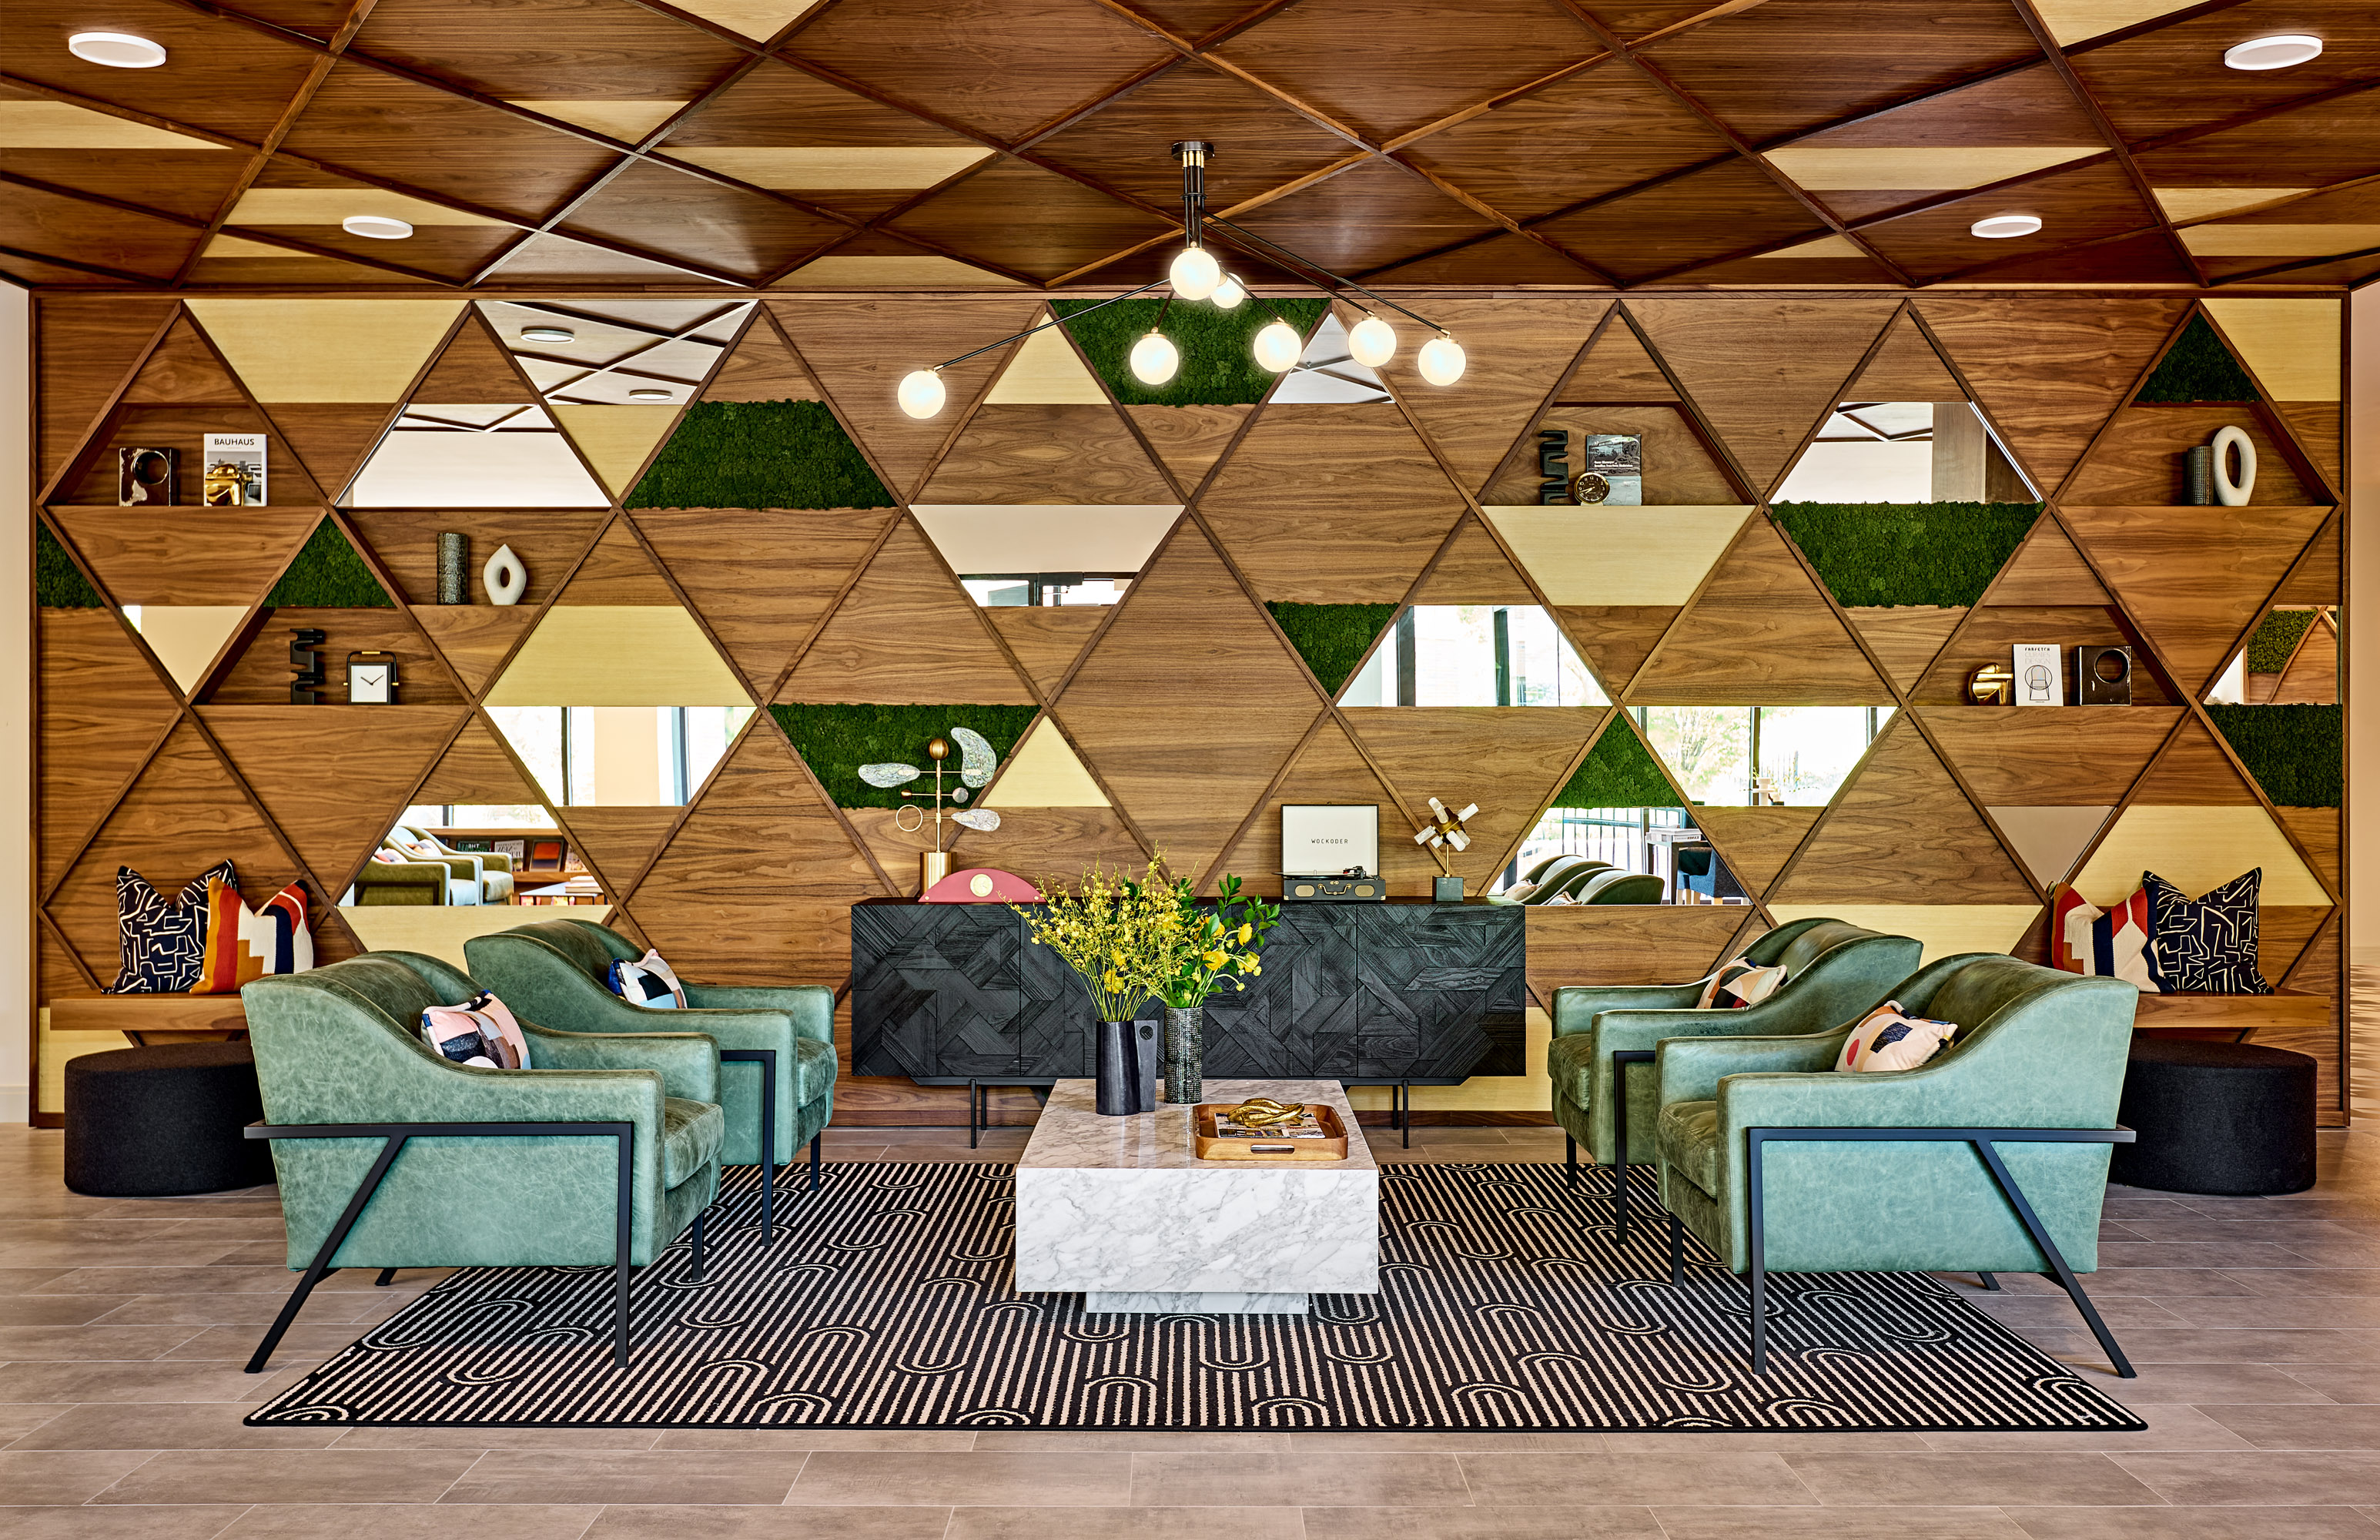 Soothing emerald toned lounge chairs contrast the bold backdrop in this main entry lobby to elevate the impact at arrival.